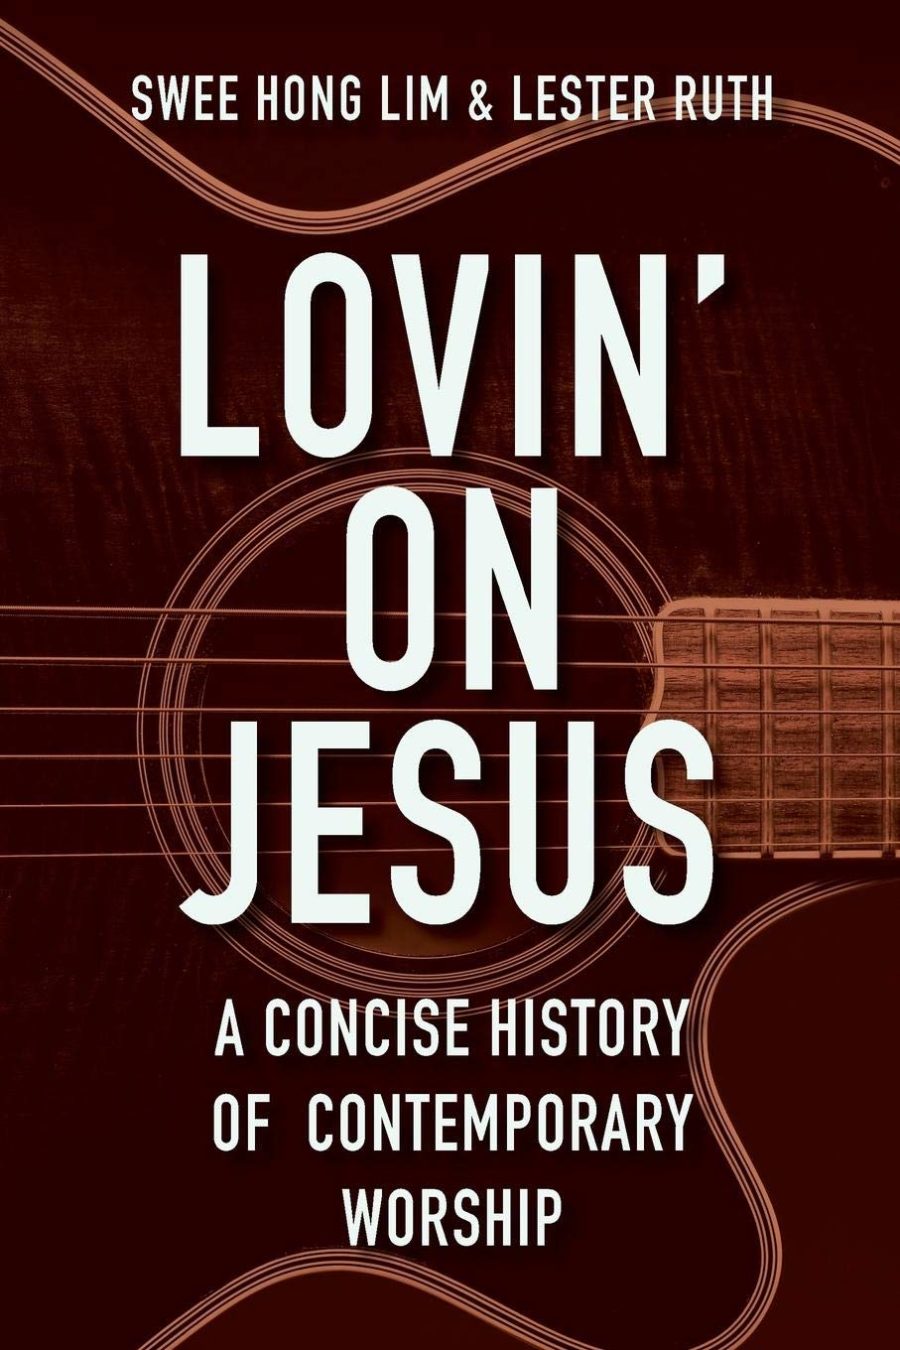 Lovin’ on Jesus: A Concise History of Contemporary Worship, by Swee ...